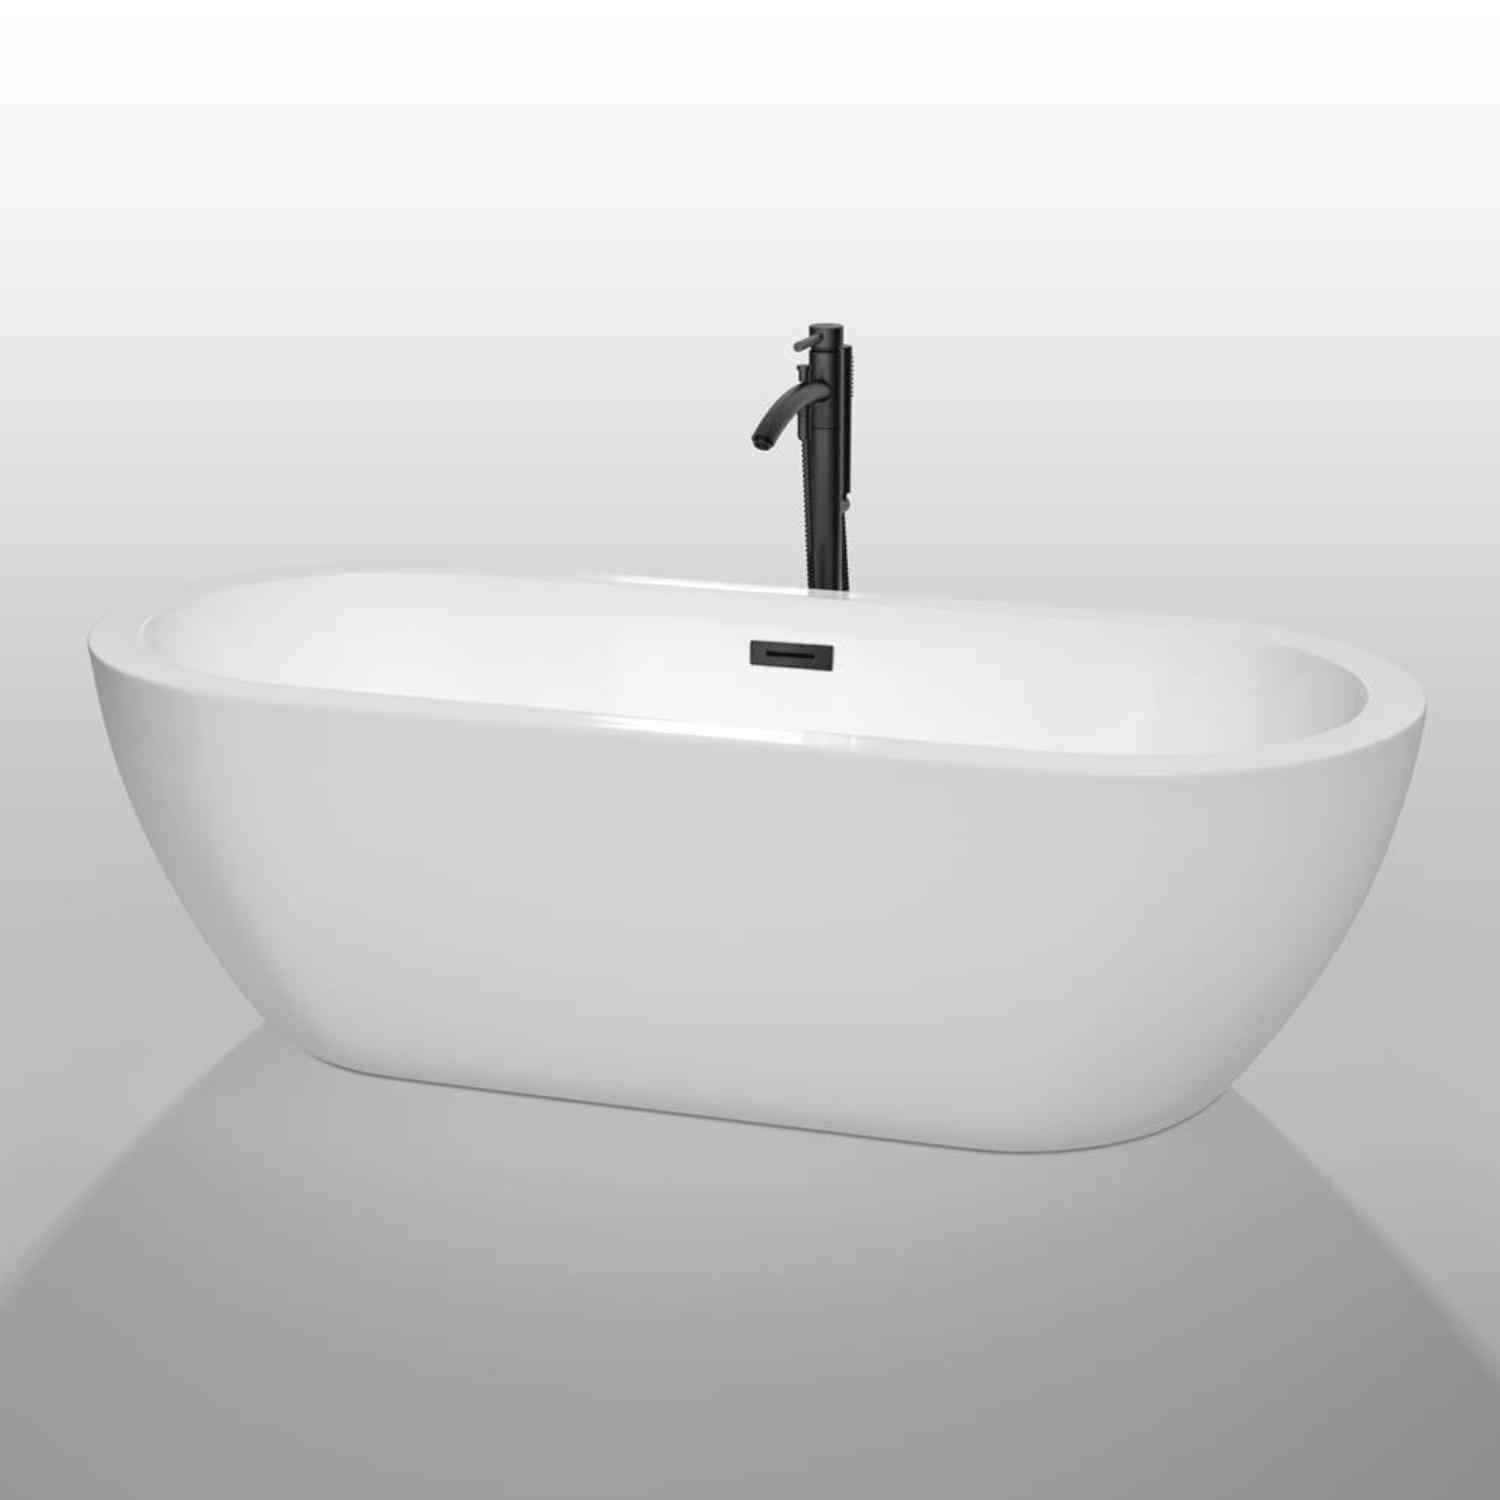 Wyndham collection Soho 72 Inch Freestanding Bathtub in White closed view